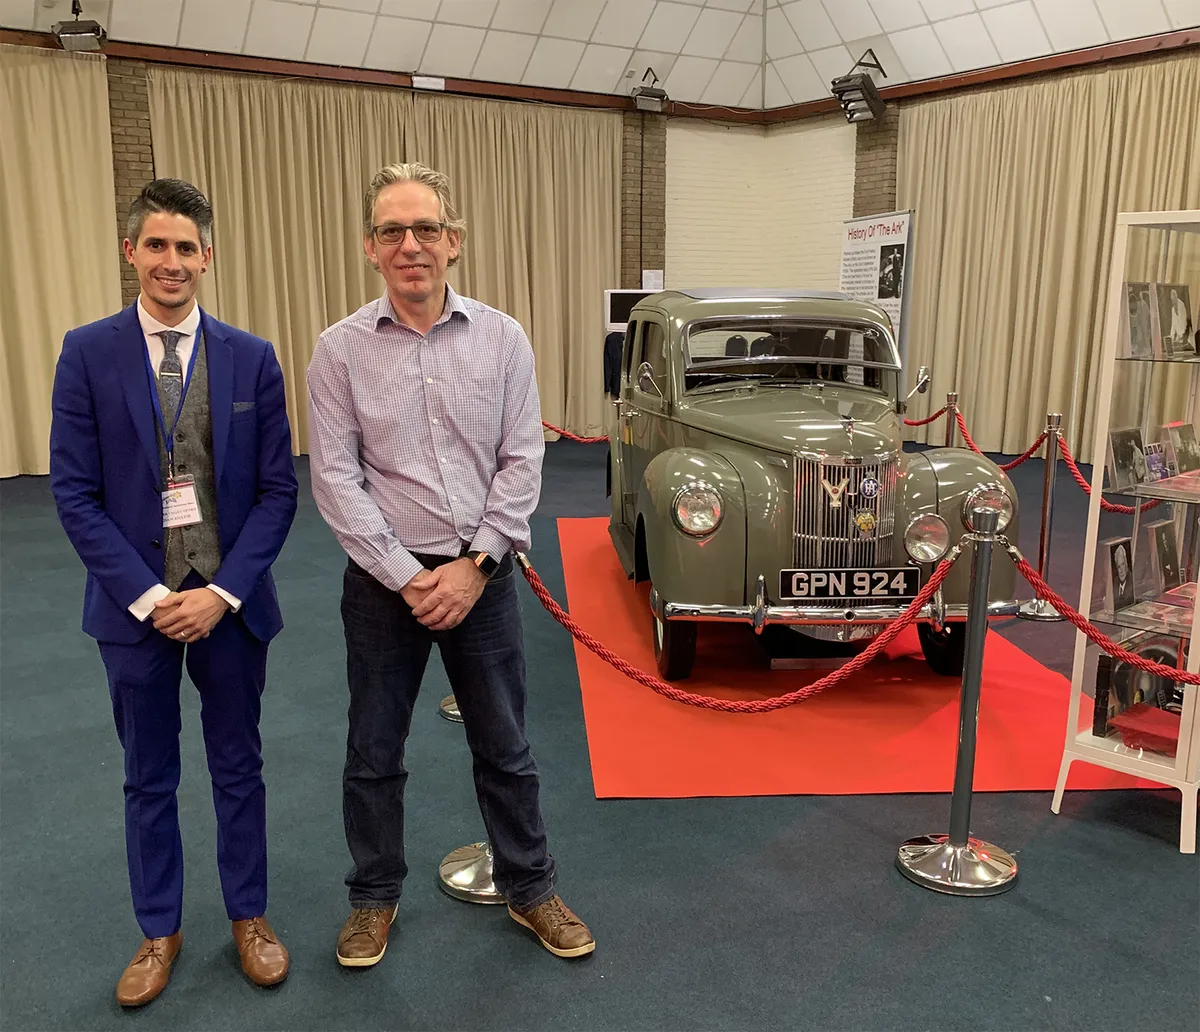 The folks from Rother Valley Optics pictured with Patrick Moore's restored car.